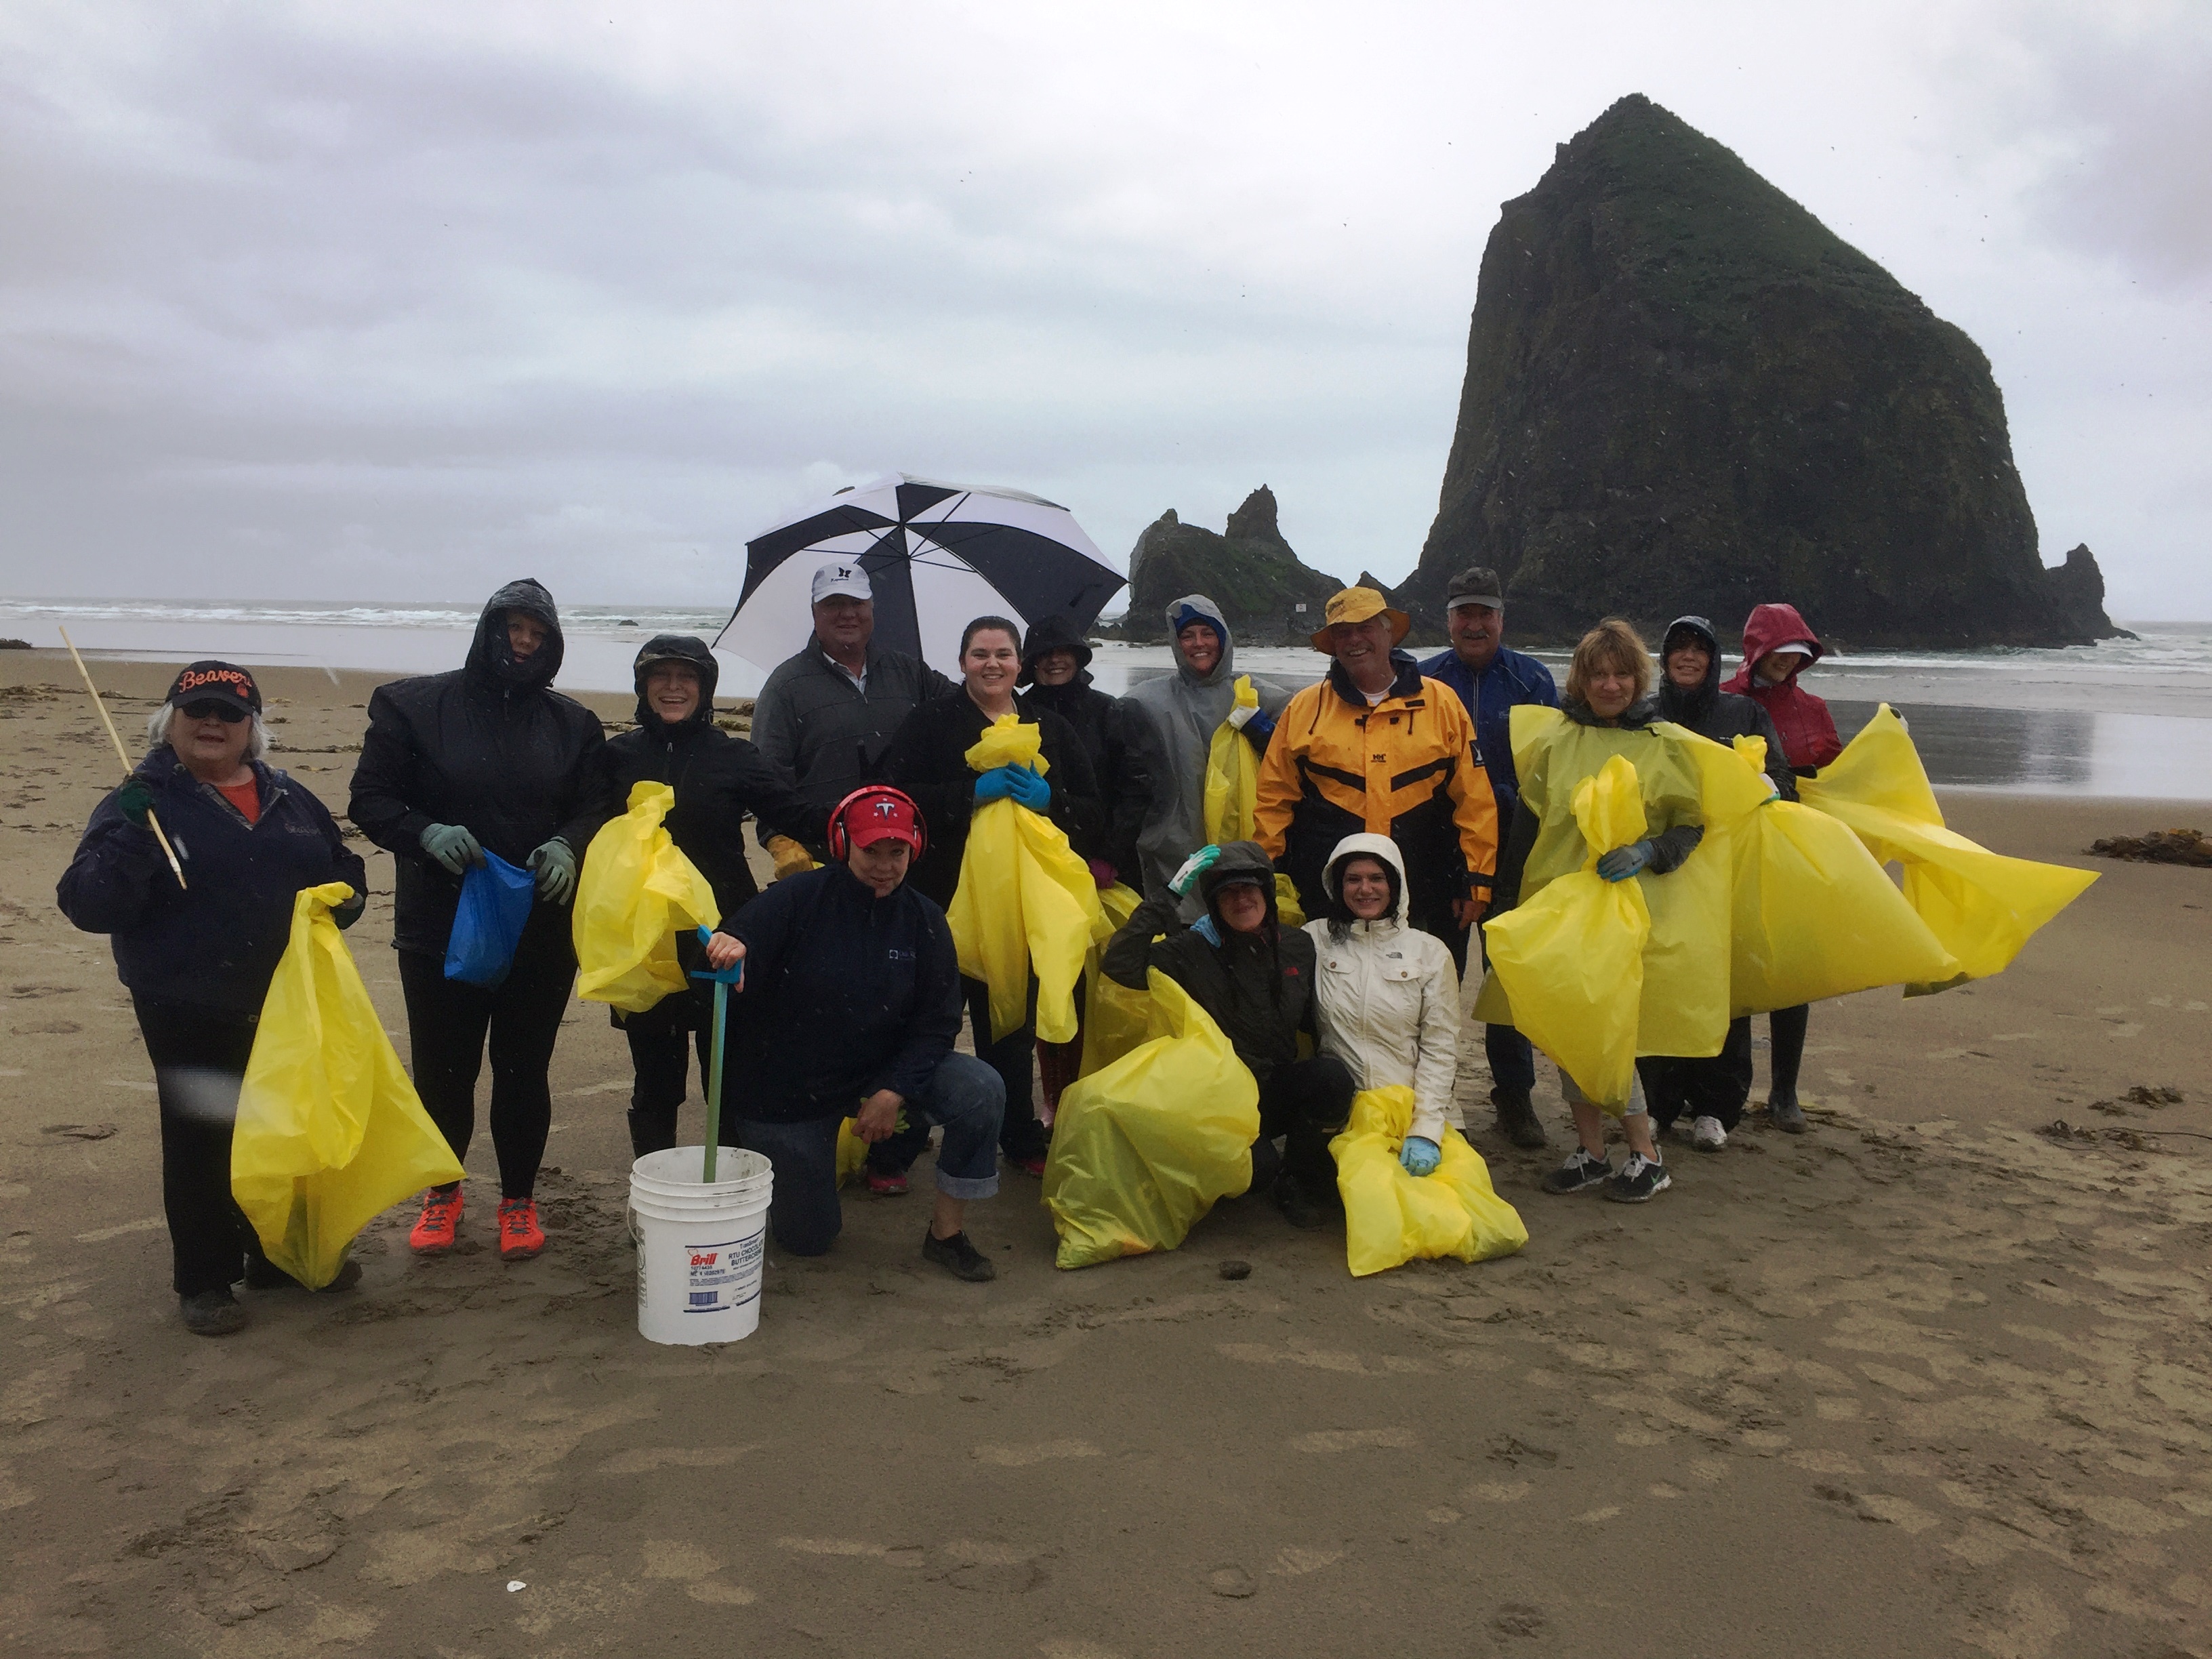 Community Service Day 2017 - Clean up Crew on the Beach (1)